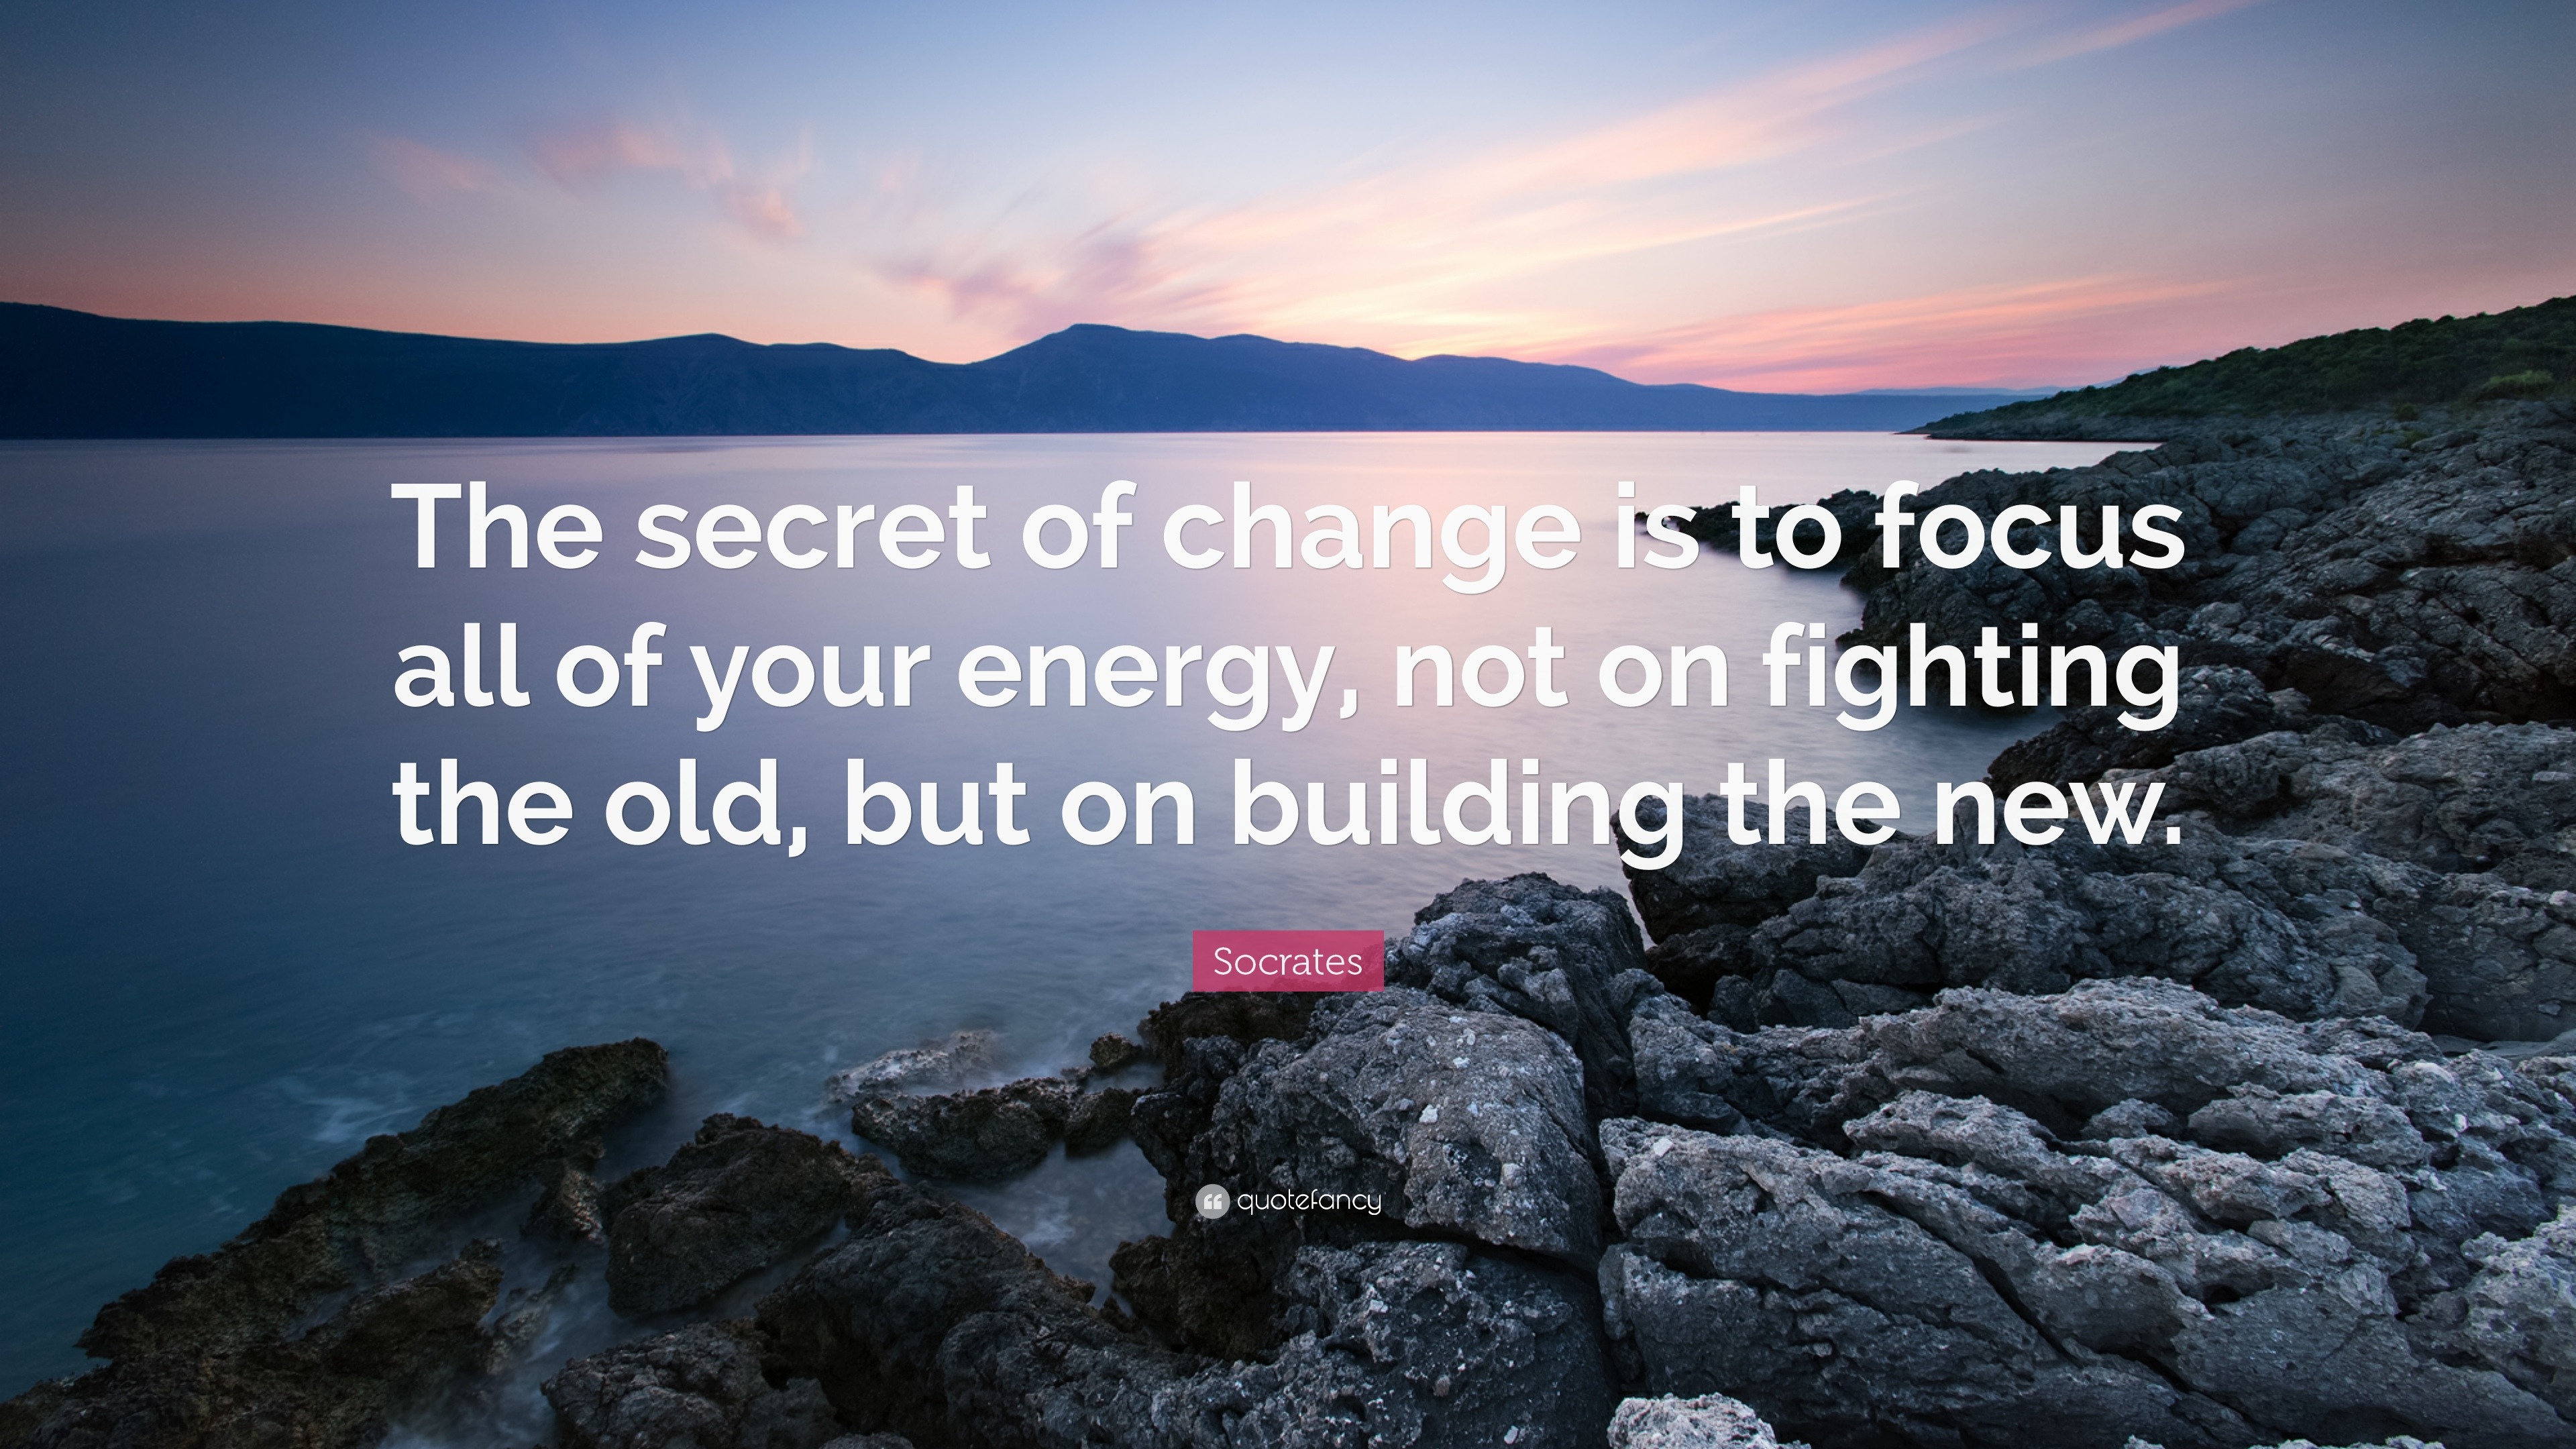 Socrates Quote: “The secret of change is to focus all of your energy